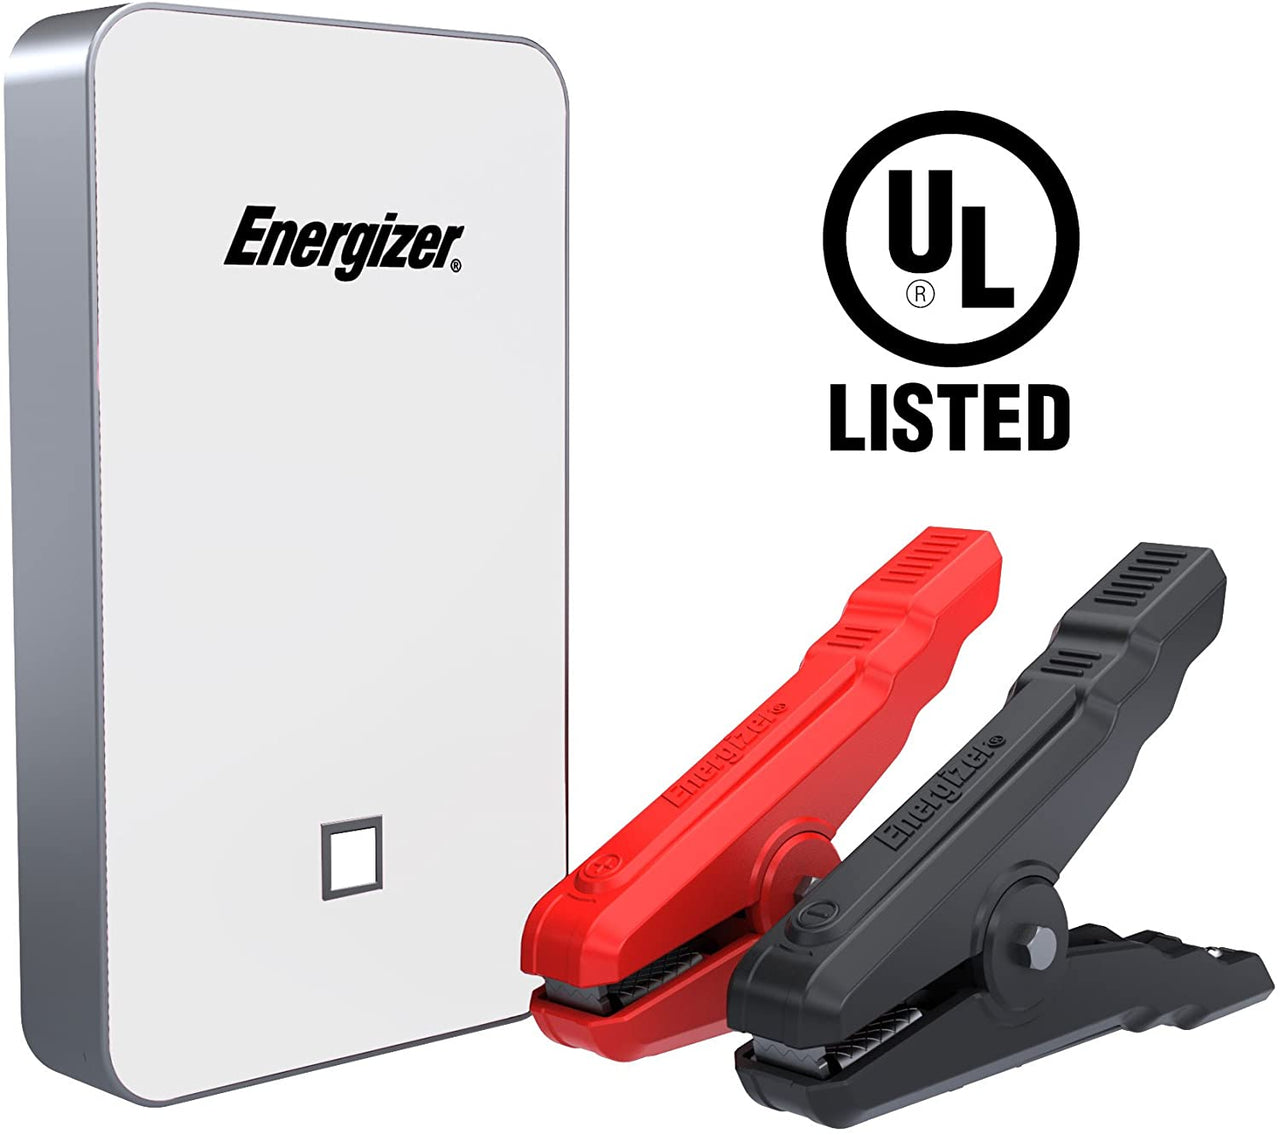 Energizer Heavy Duty Jump Starter 7500mAh with Built-In UL Lithium battery - Portable Car Jumper and 2.4A Power Bank USB Charger (White) - Jump-Starters.com roadside assistance store